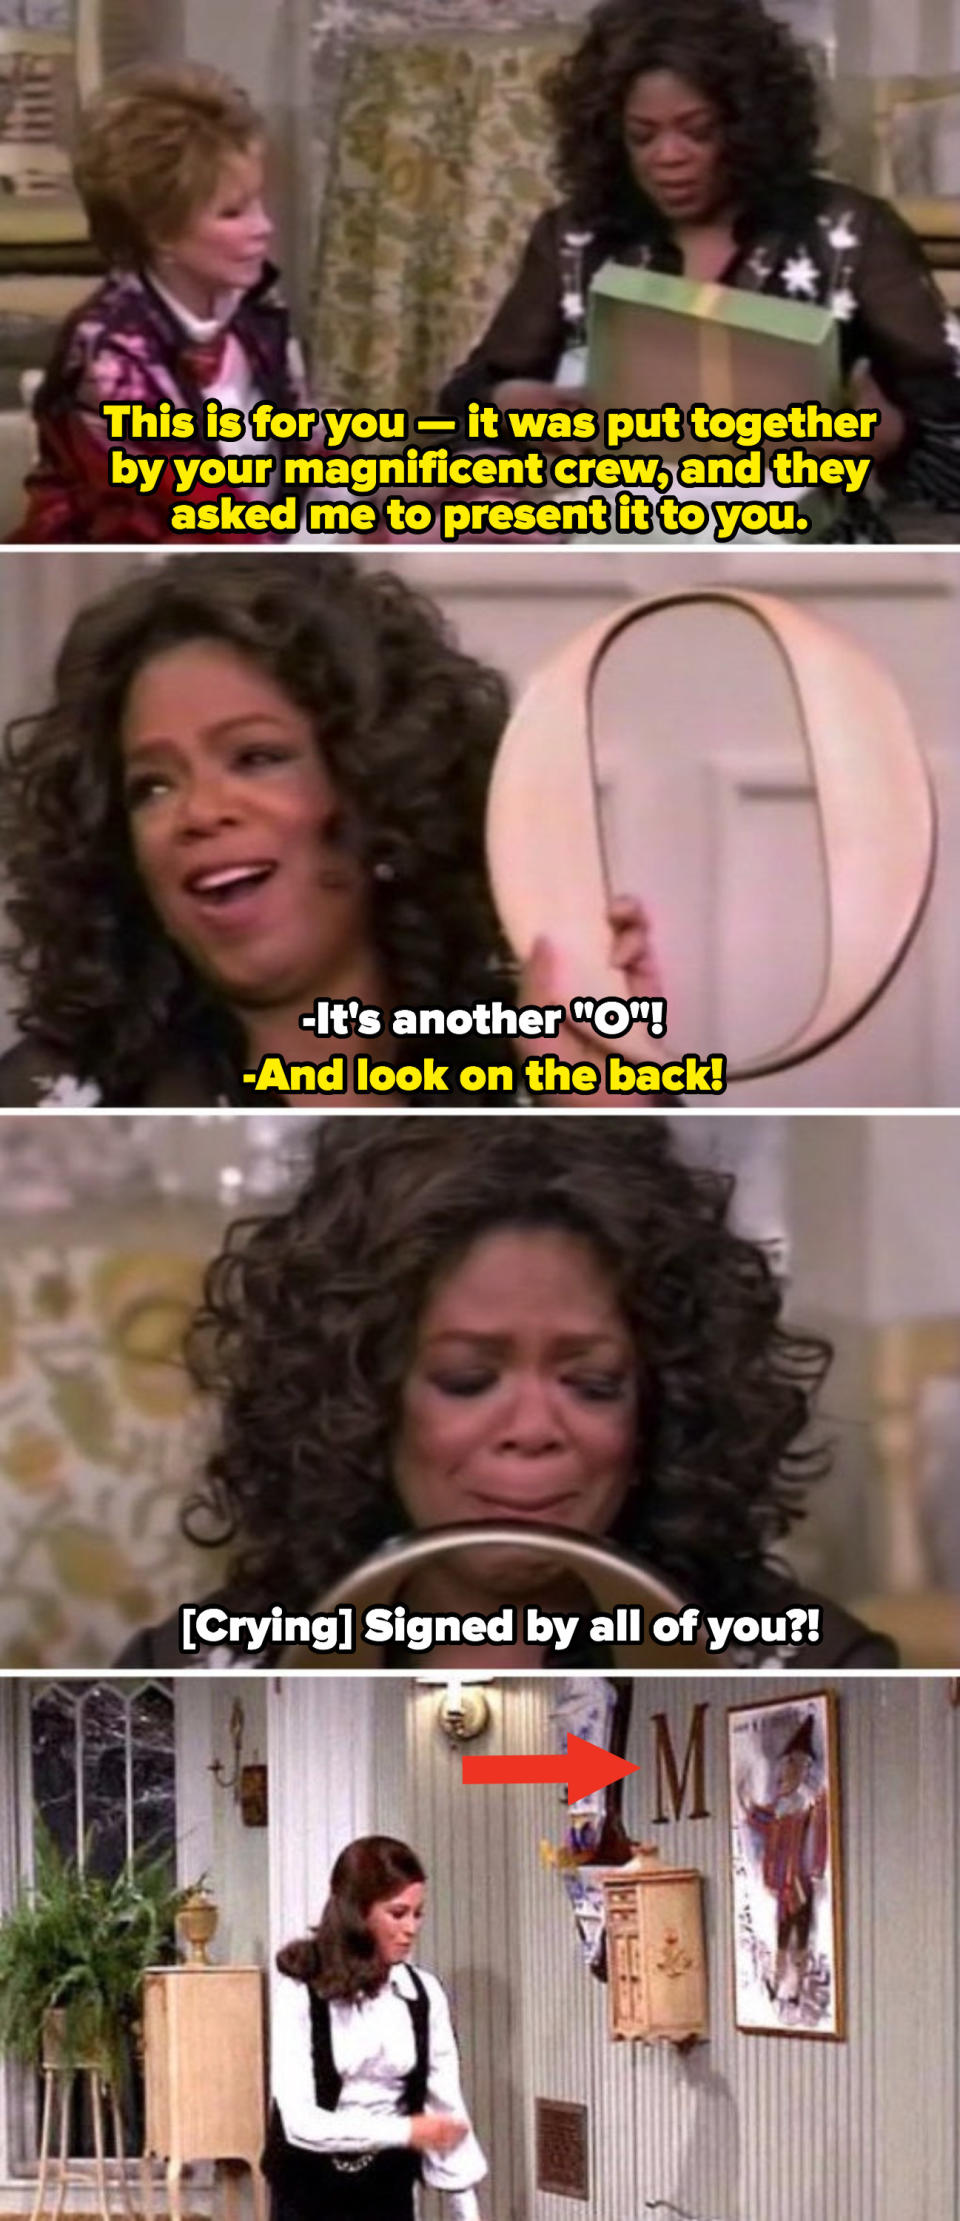 Mary Tyler Moore giving Oprah an "O" on "The Oprah Winfrey Show;" Mary Richards in her apartment in "The Mary Tyler Moore Show"